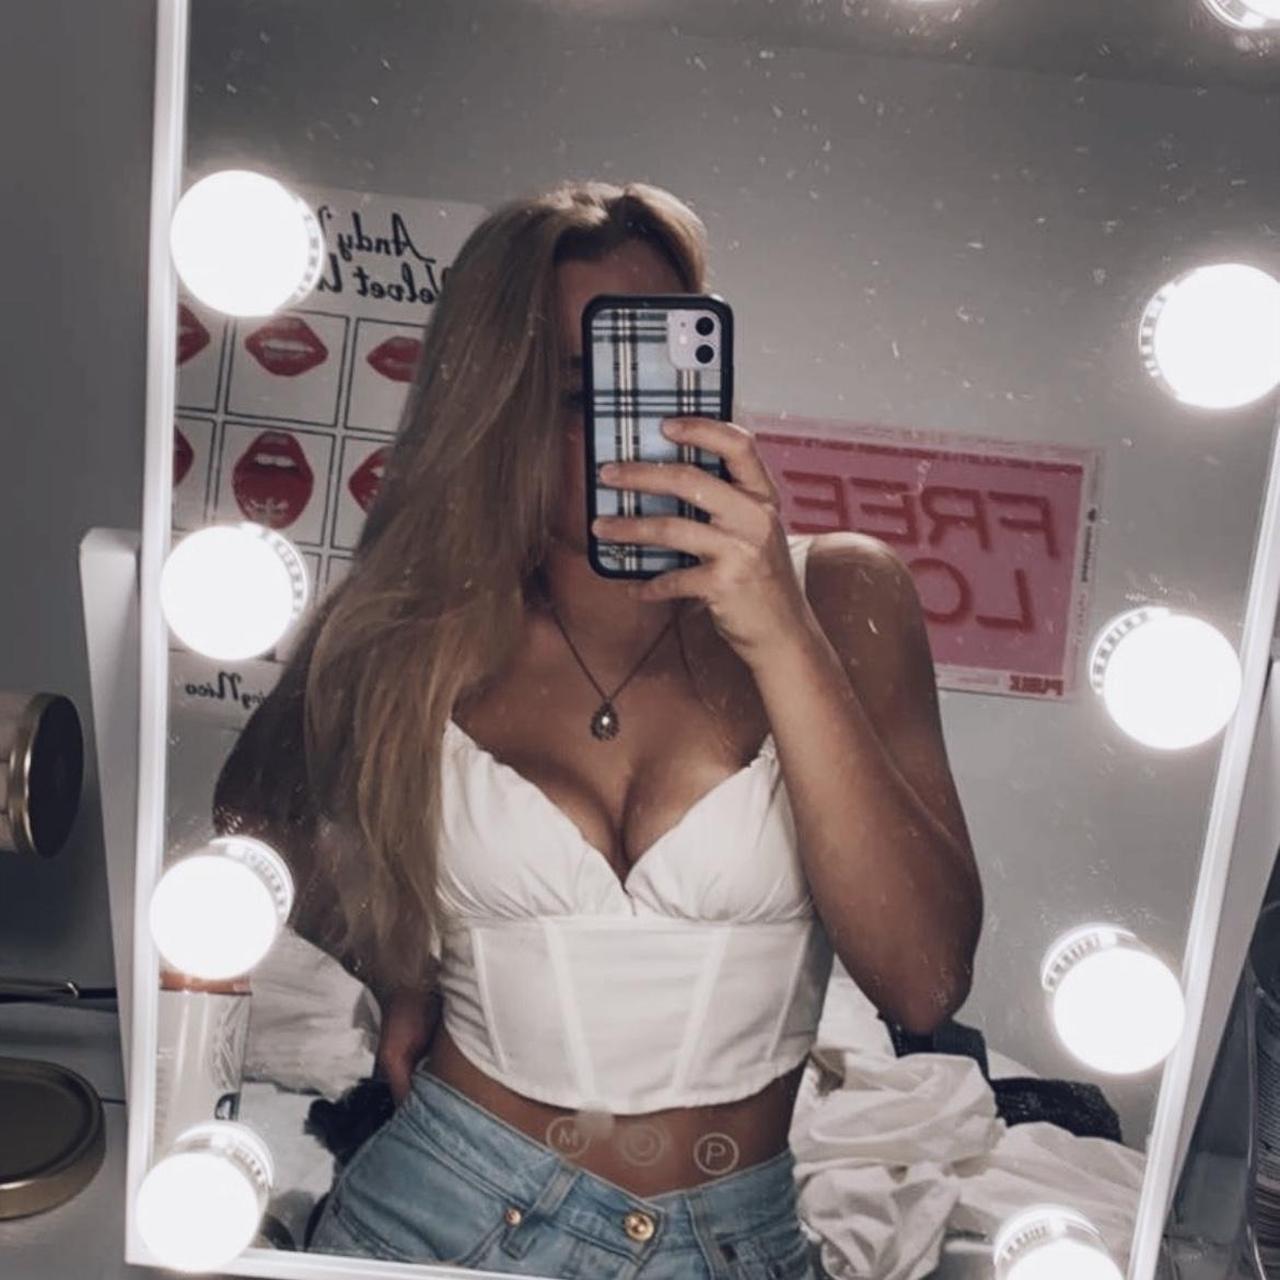 Pretty Little Thing white corset top small - Depop